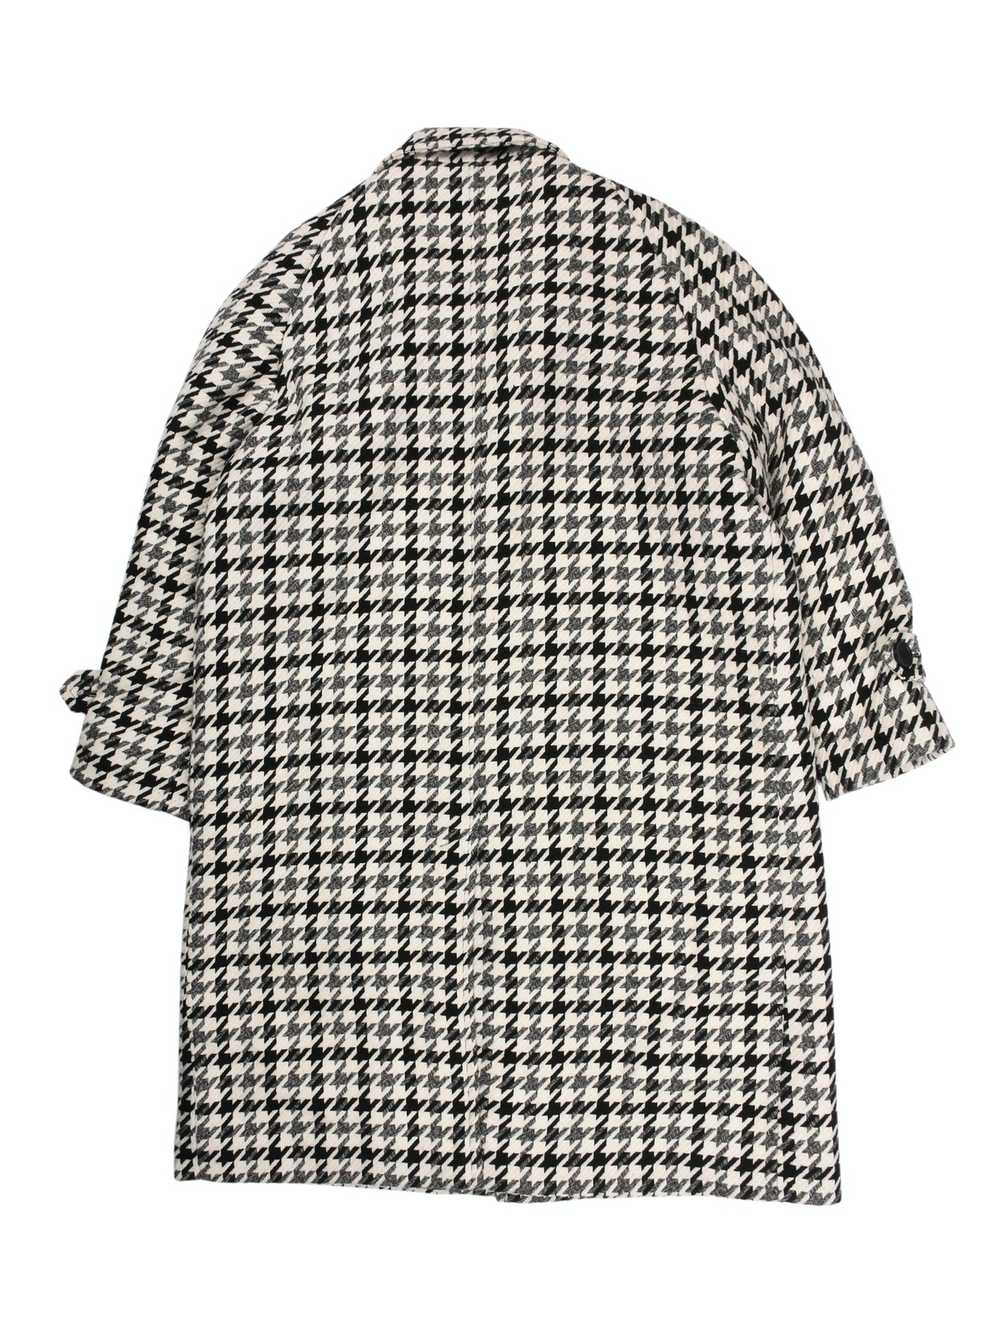 Misbhv Houndstooth Lil Yachty Yacht Week Collecti… - image 2